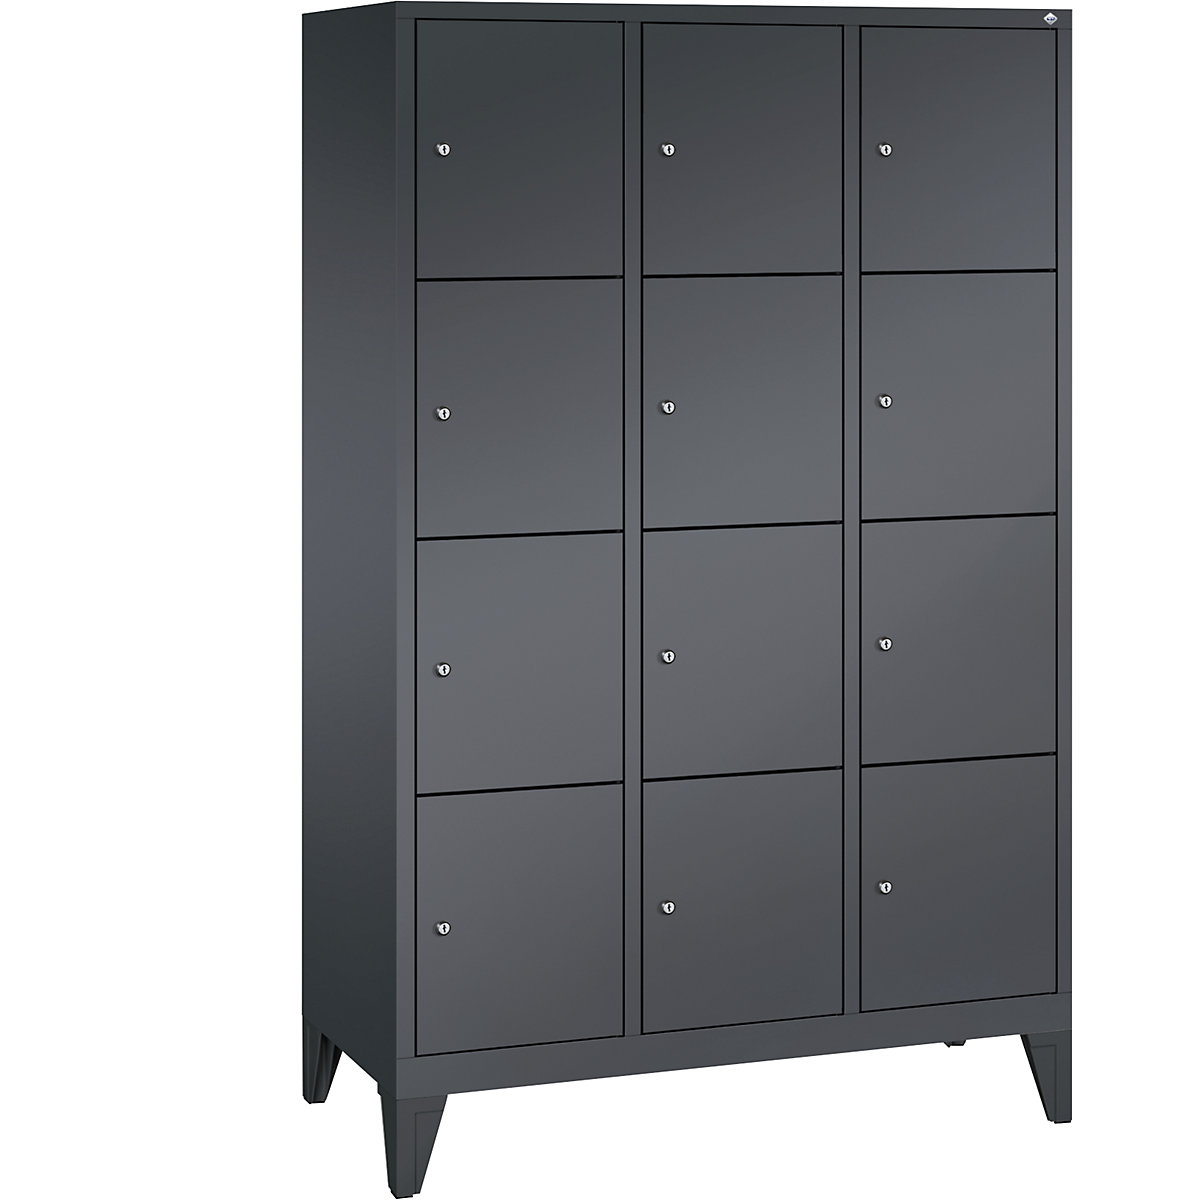 CLASSIC locker unit with feet – C+P, 3 compartments, 4 shelf compartments each, compartment width 400 mm, black grey-6